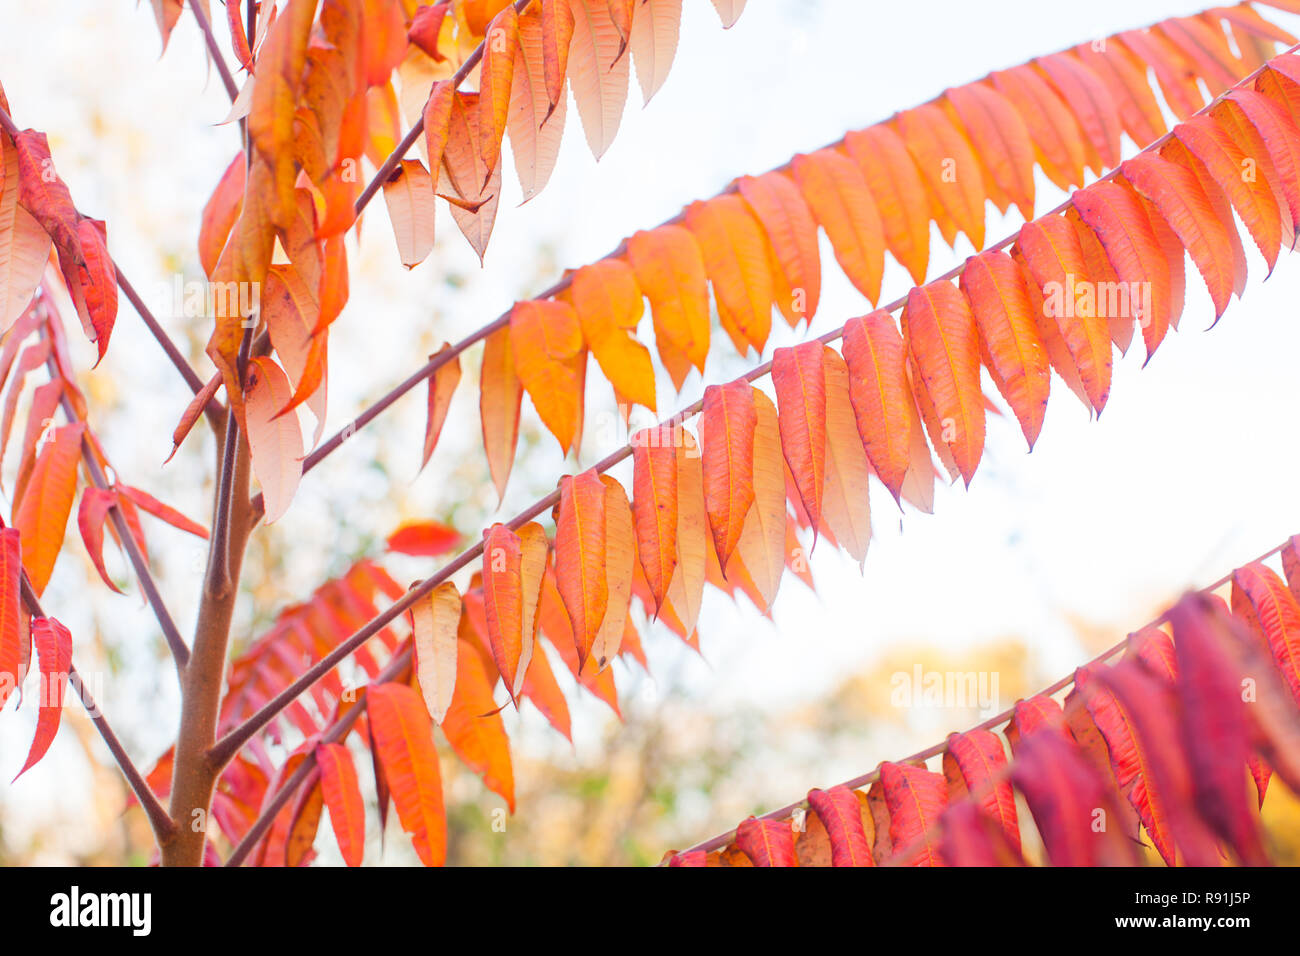 Autumn beautiful leaves background red and orange Stock Photo